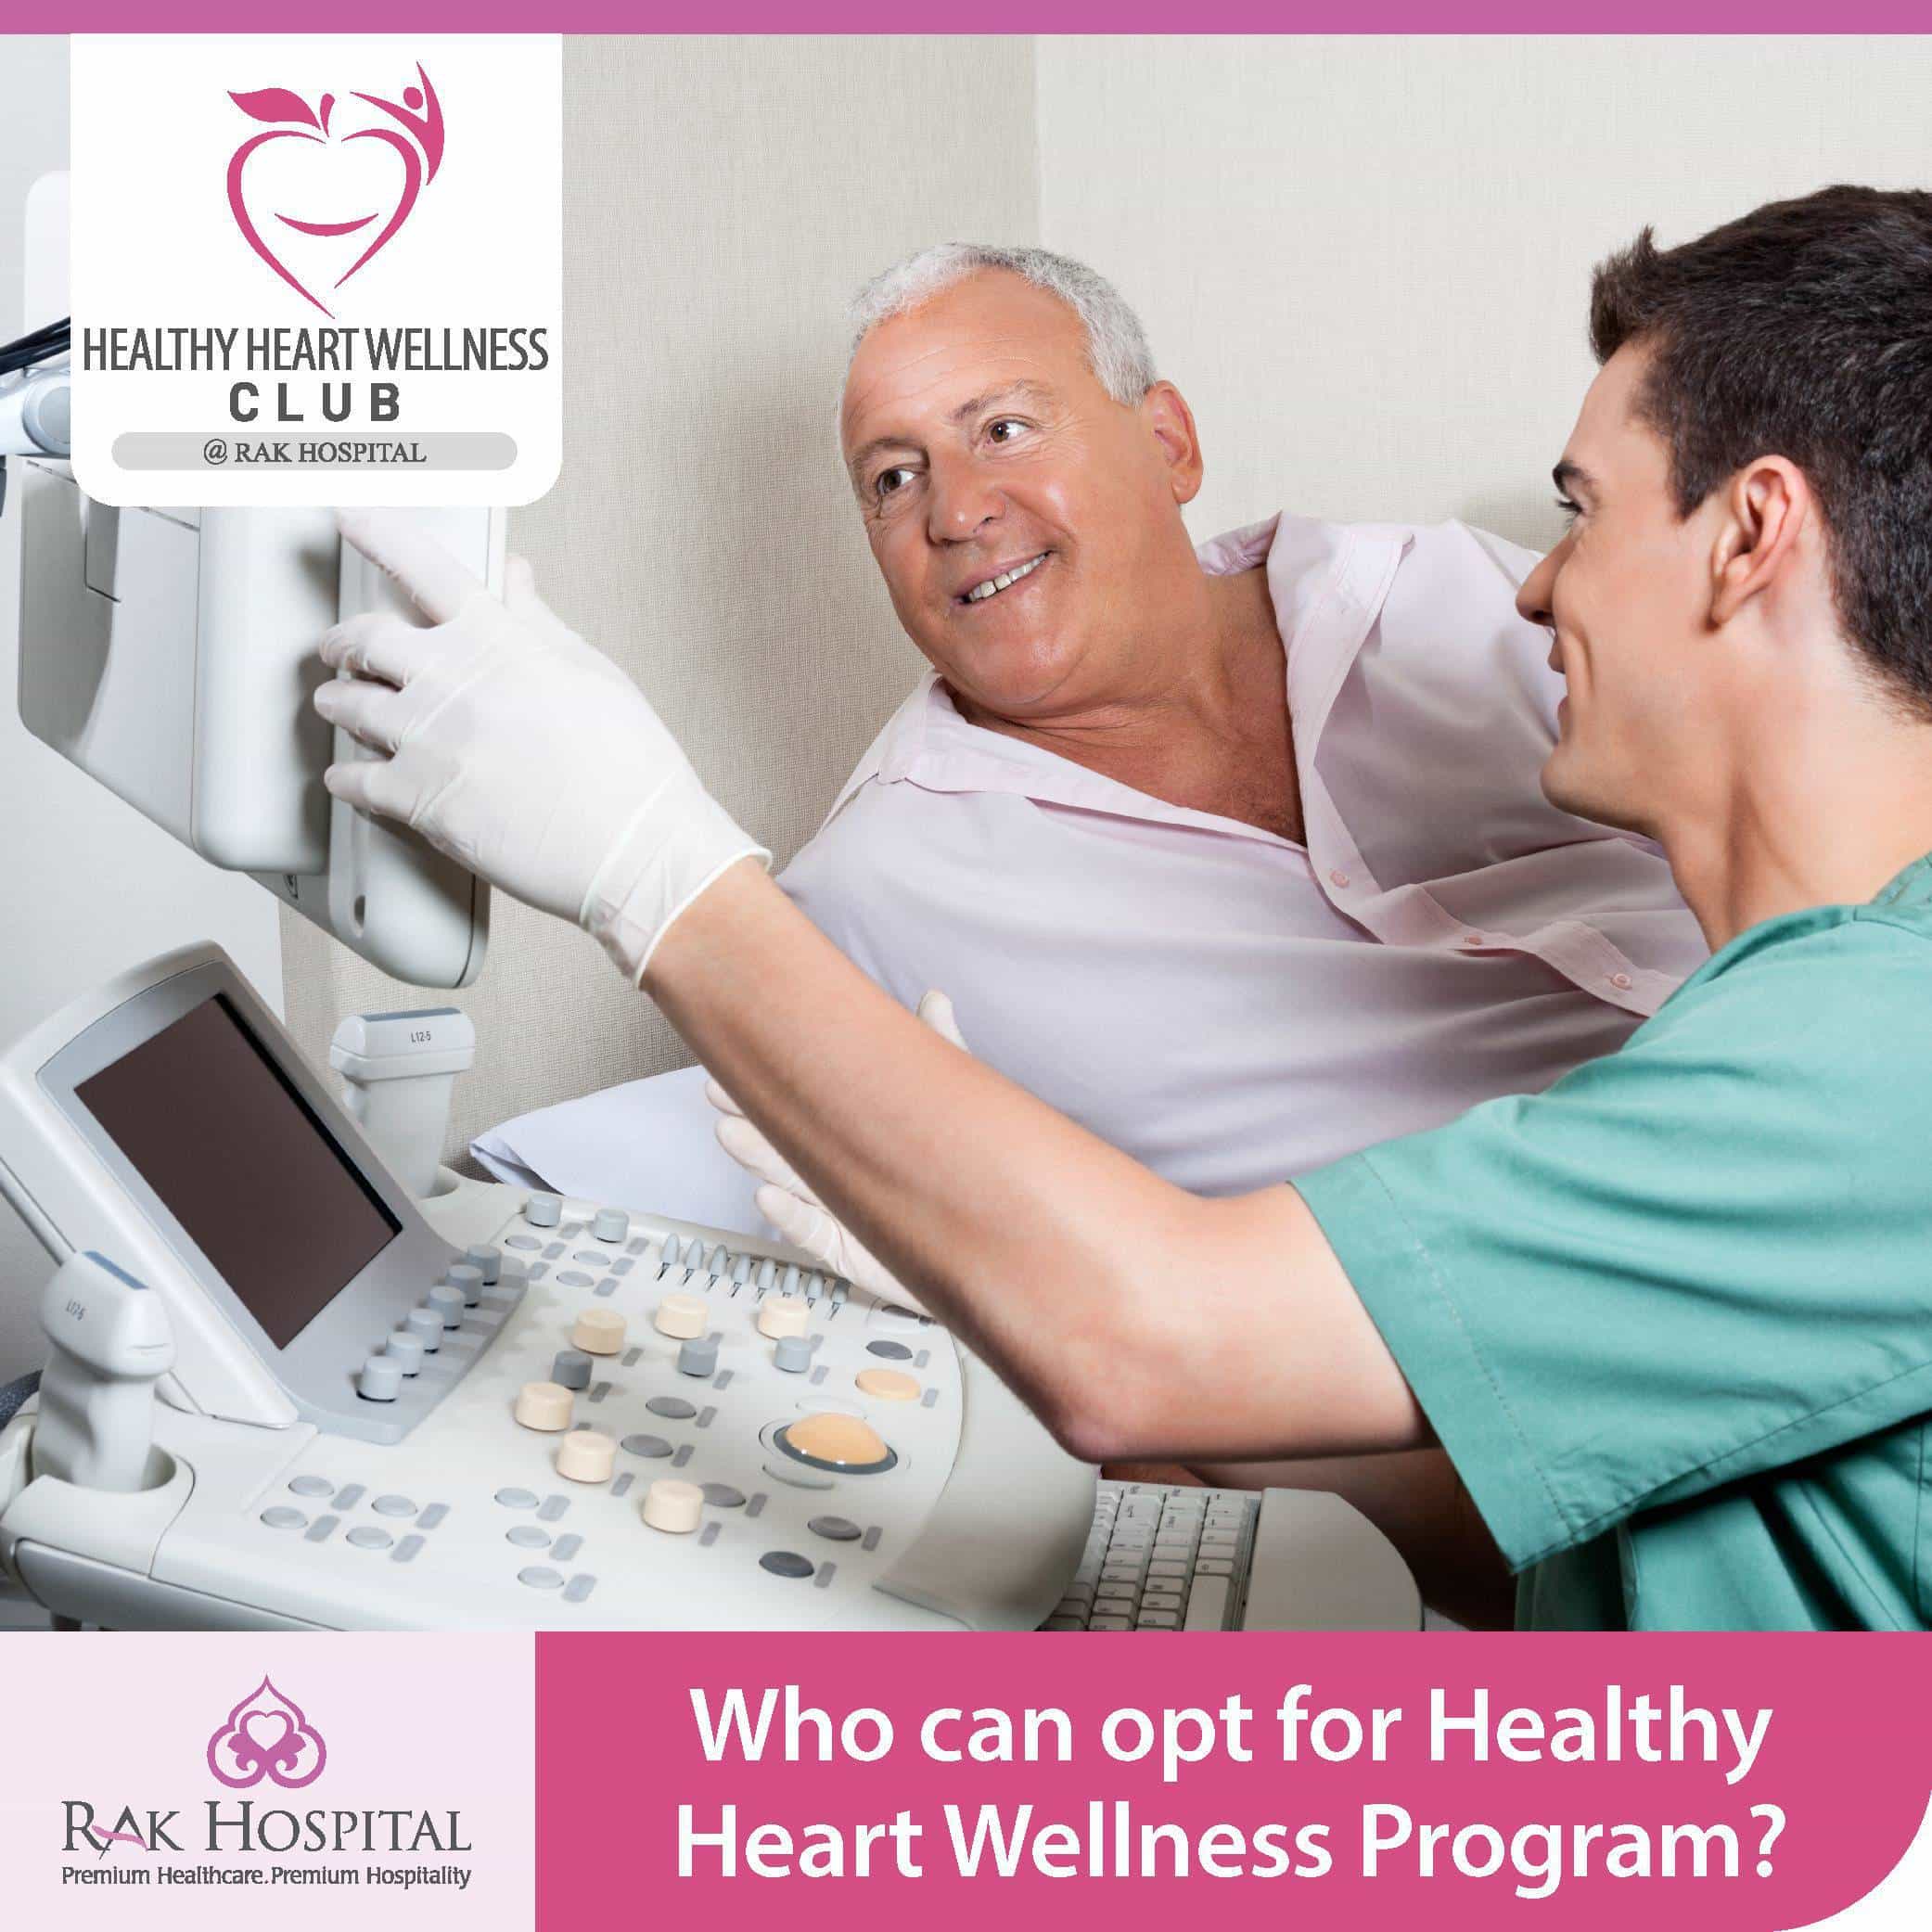 Who can opt for Healthy Heart Wellness